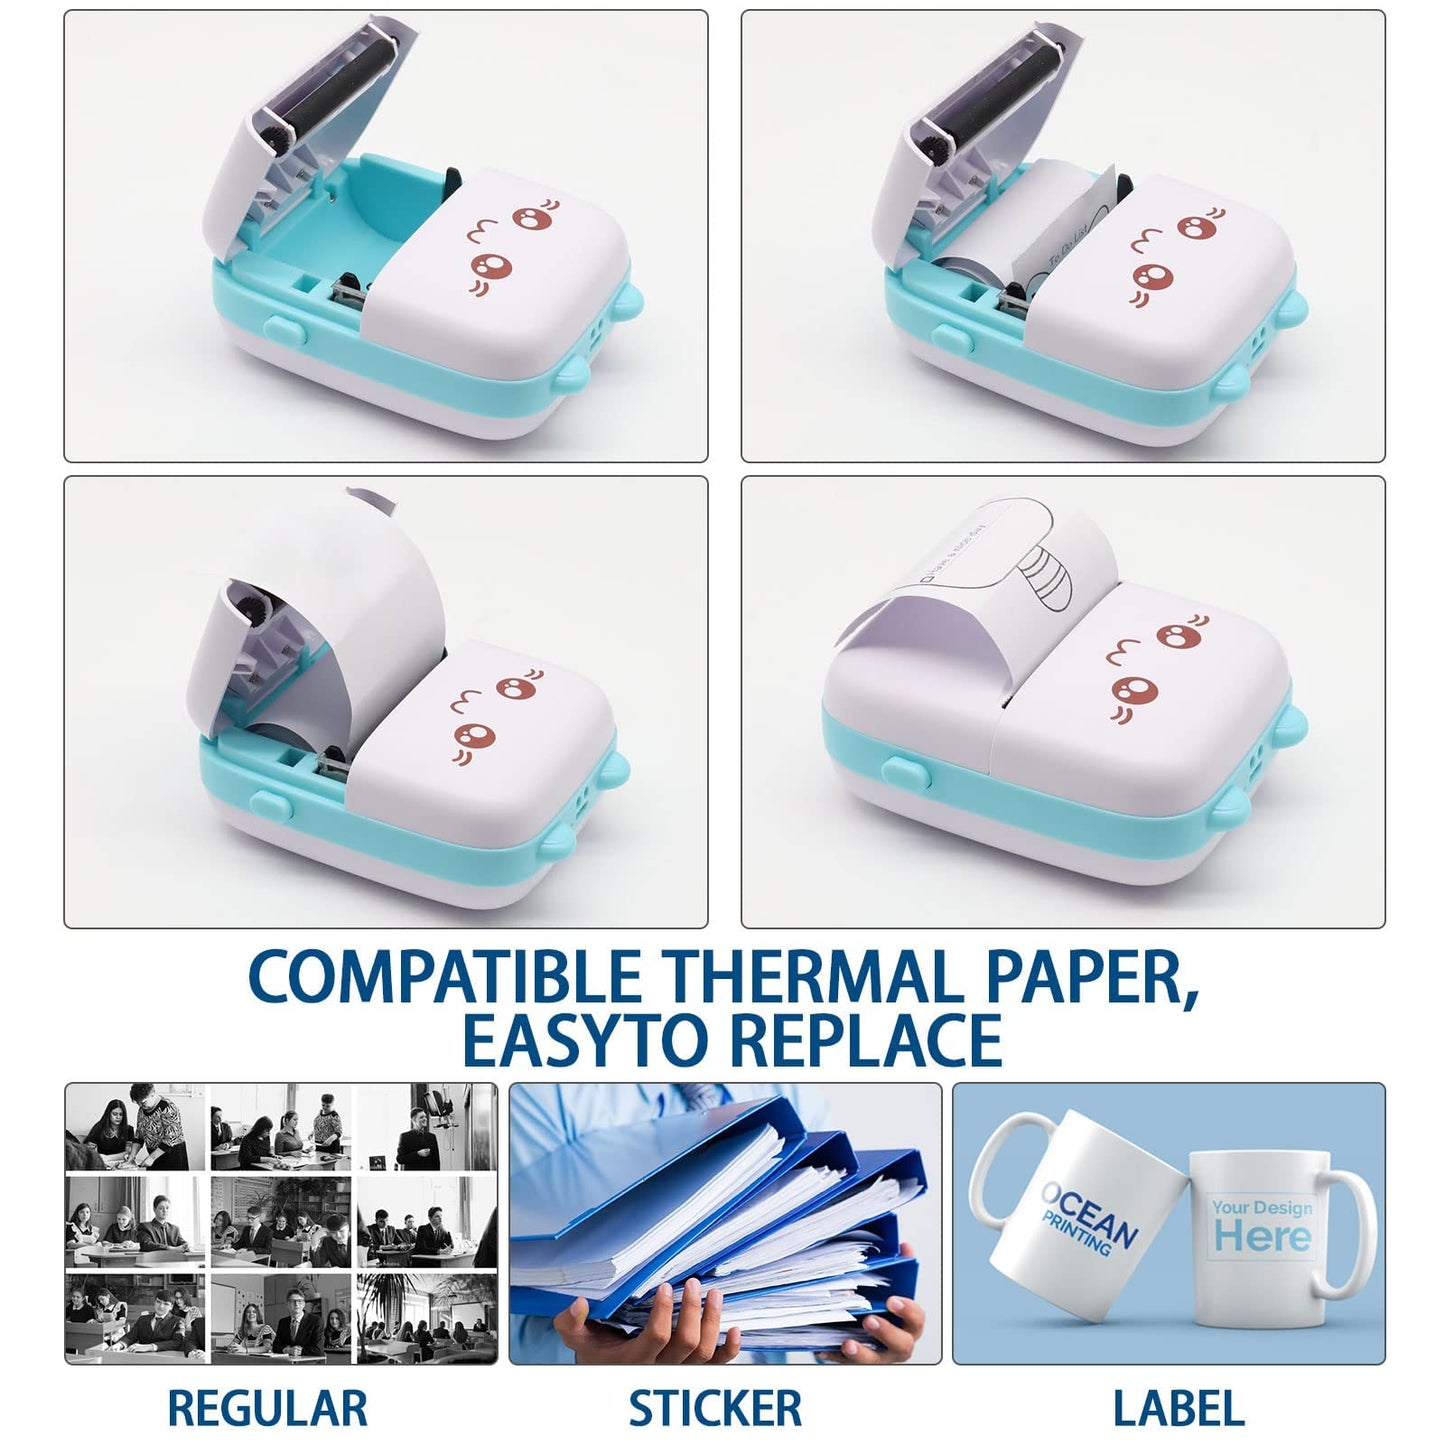 Mini Thermal Printer,Bluetooth Labler Maker,Portable Inkless Printers Compatible with Android and ios